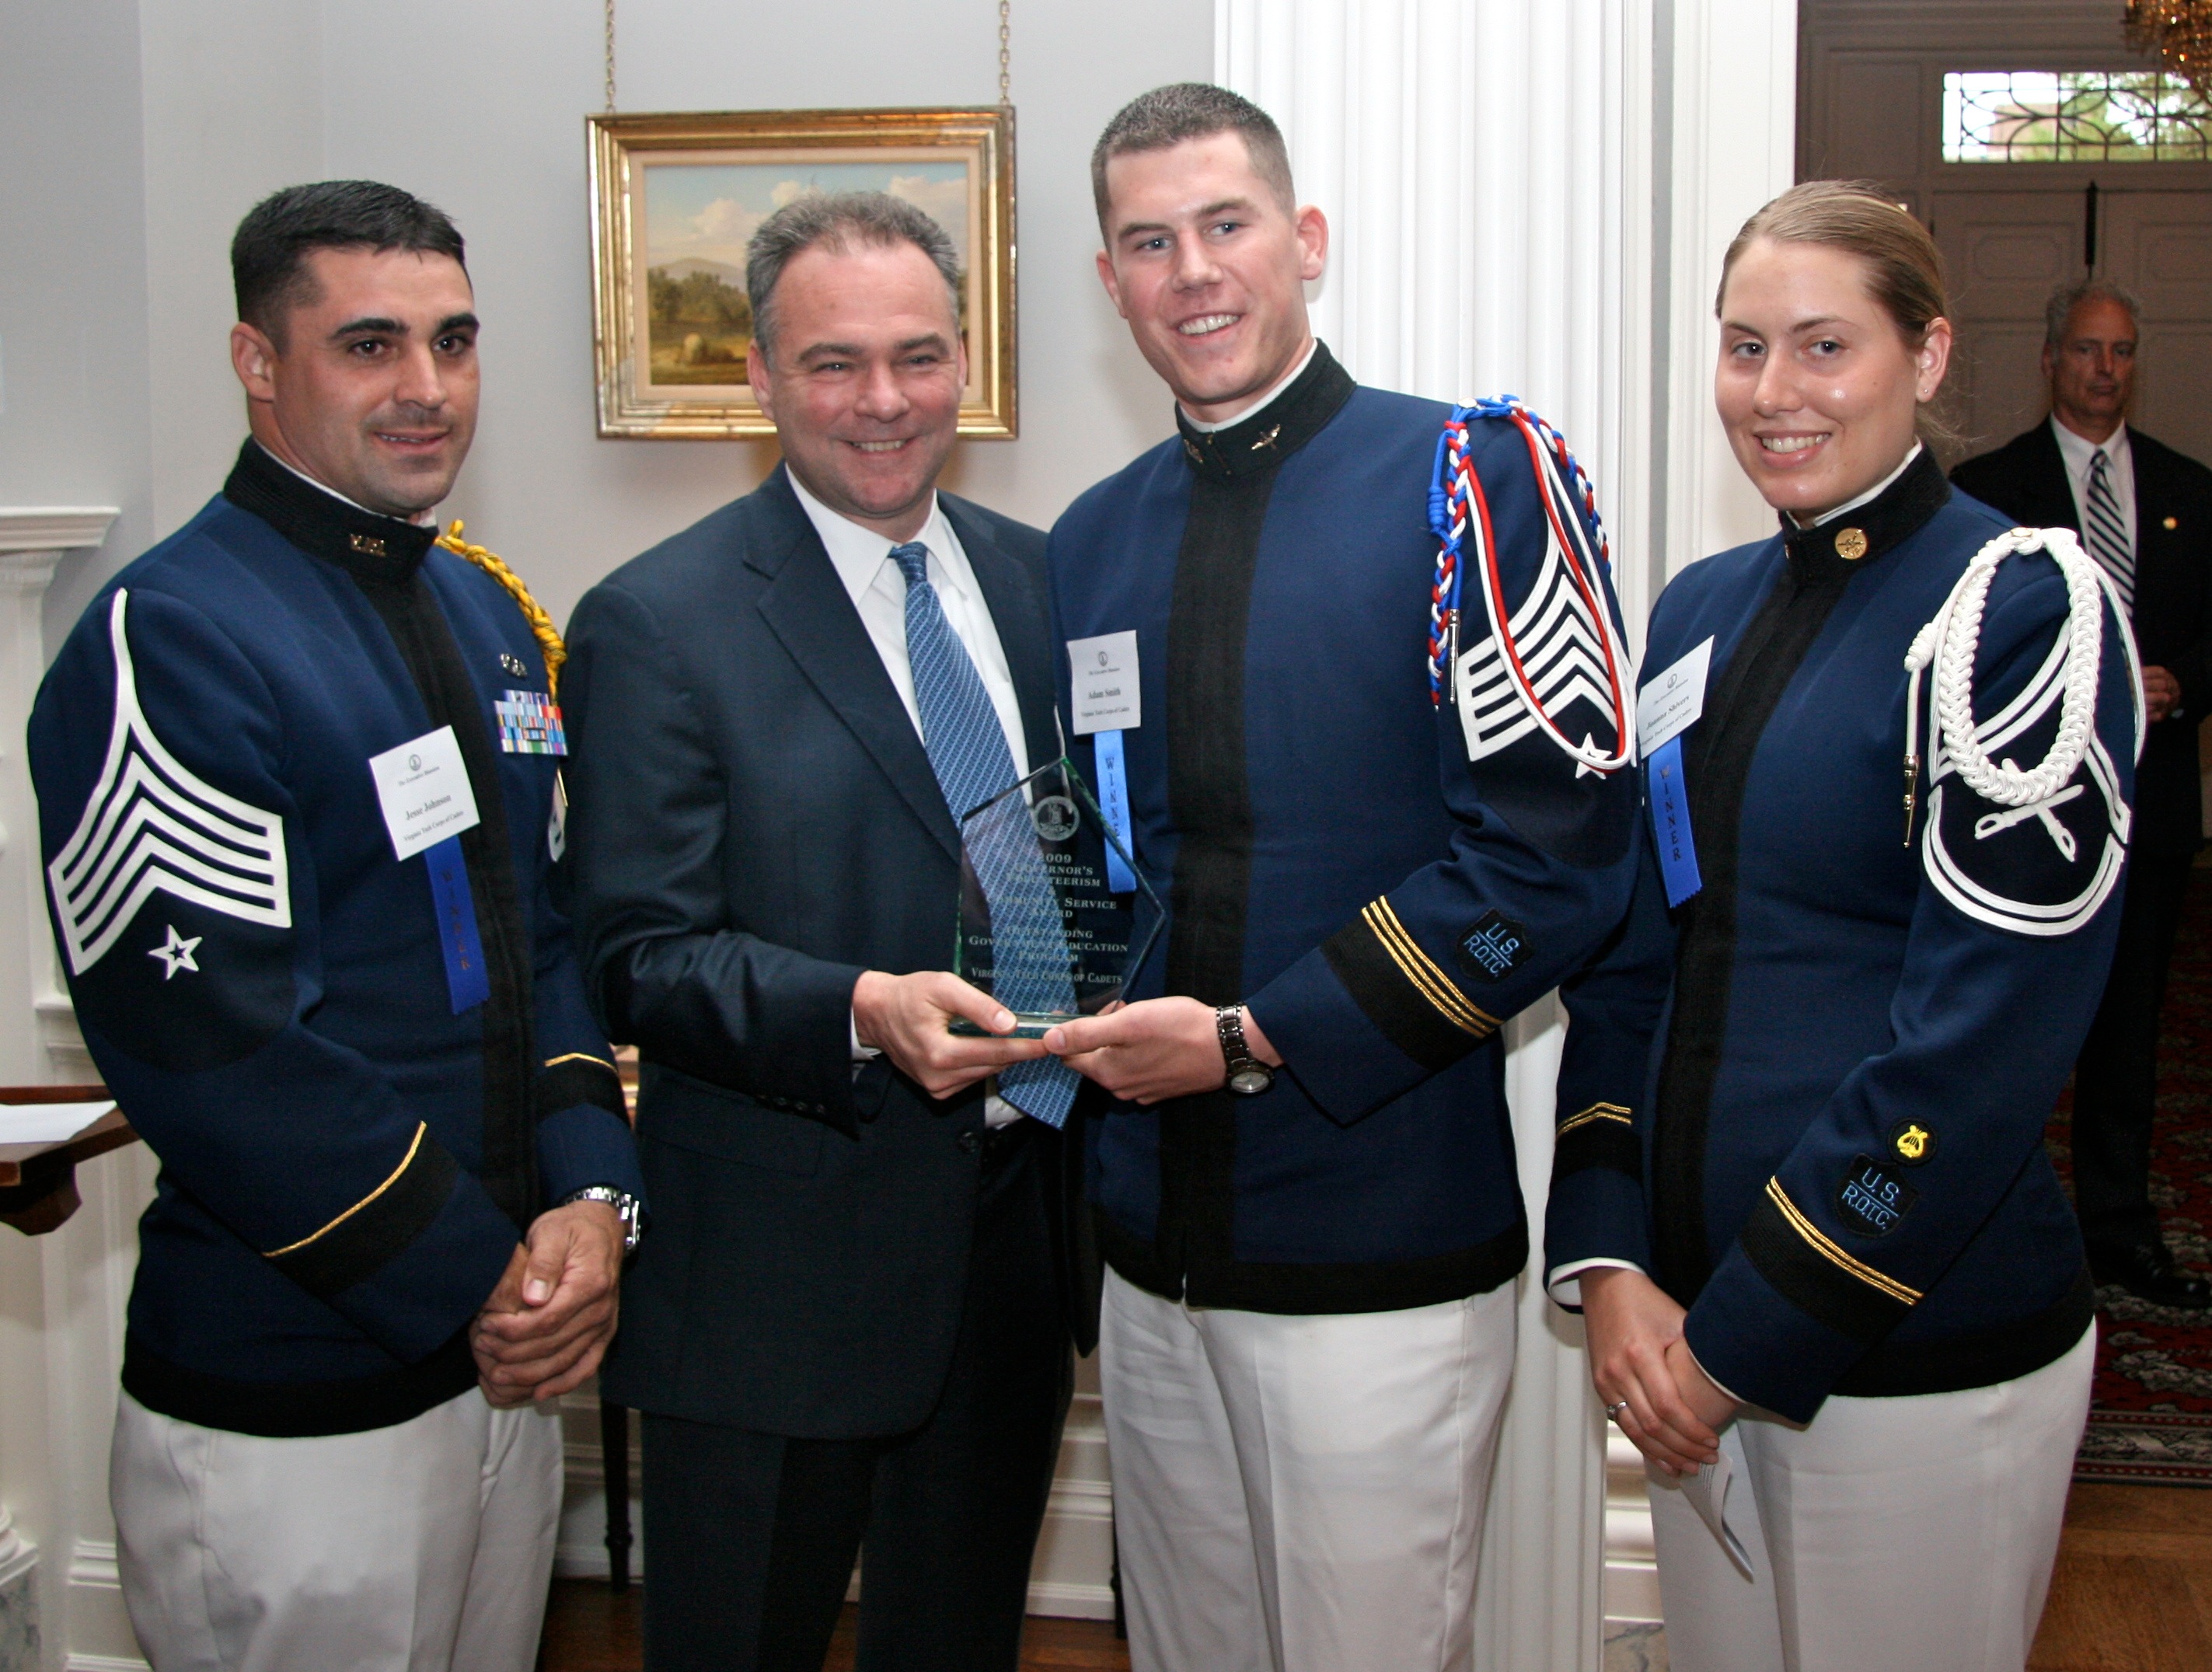 Receiving the award from Gov. Tim Kaine on behalf of the corps were Cadet Jesse Johnson, of Christiansburg, Va., a senior majoring in history in the College of Liberal Arts and Human Sciences, Cadet Adam Smith of Ashburn, Va., a senior majoring in mechanical engineering in the College of Engineering, and Cadet Joanna Shivers of Black Hawk, S.D., a junior majoring in biology in the College of Science.